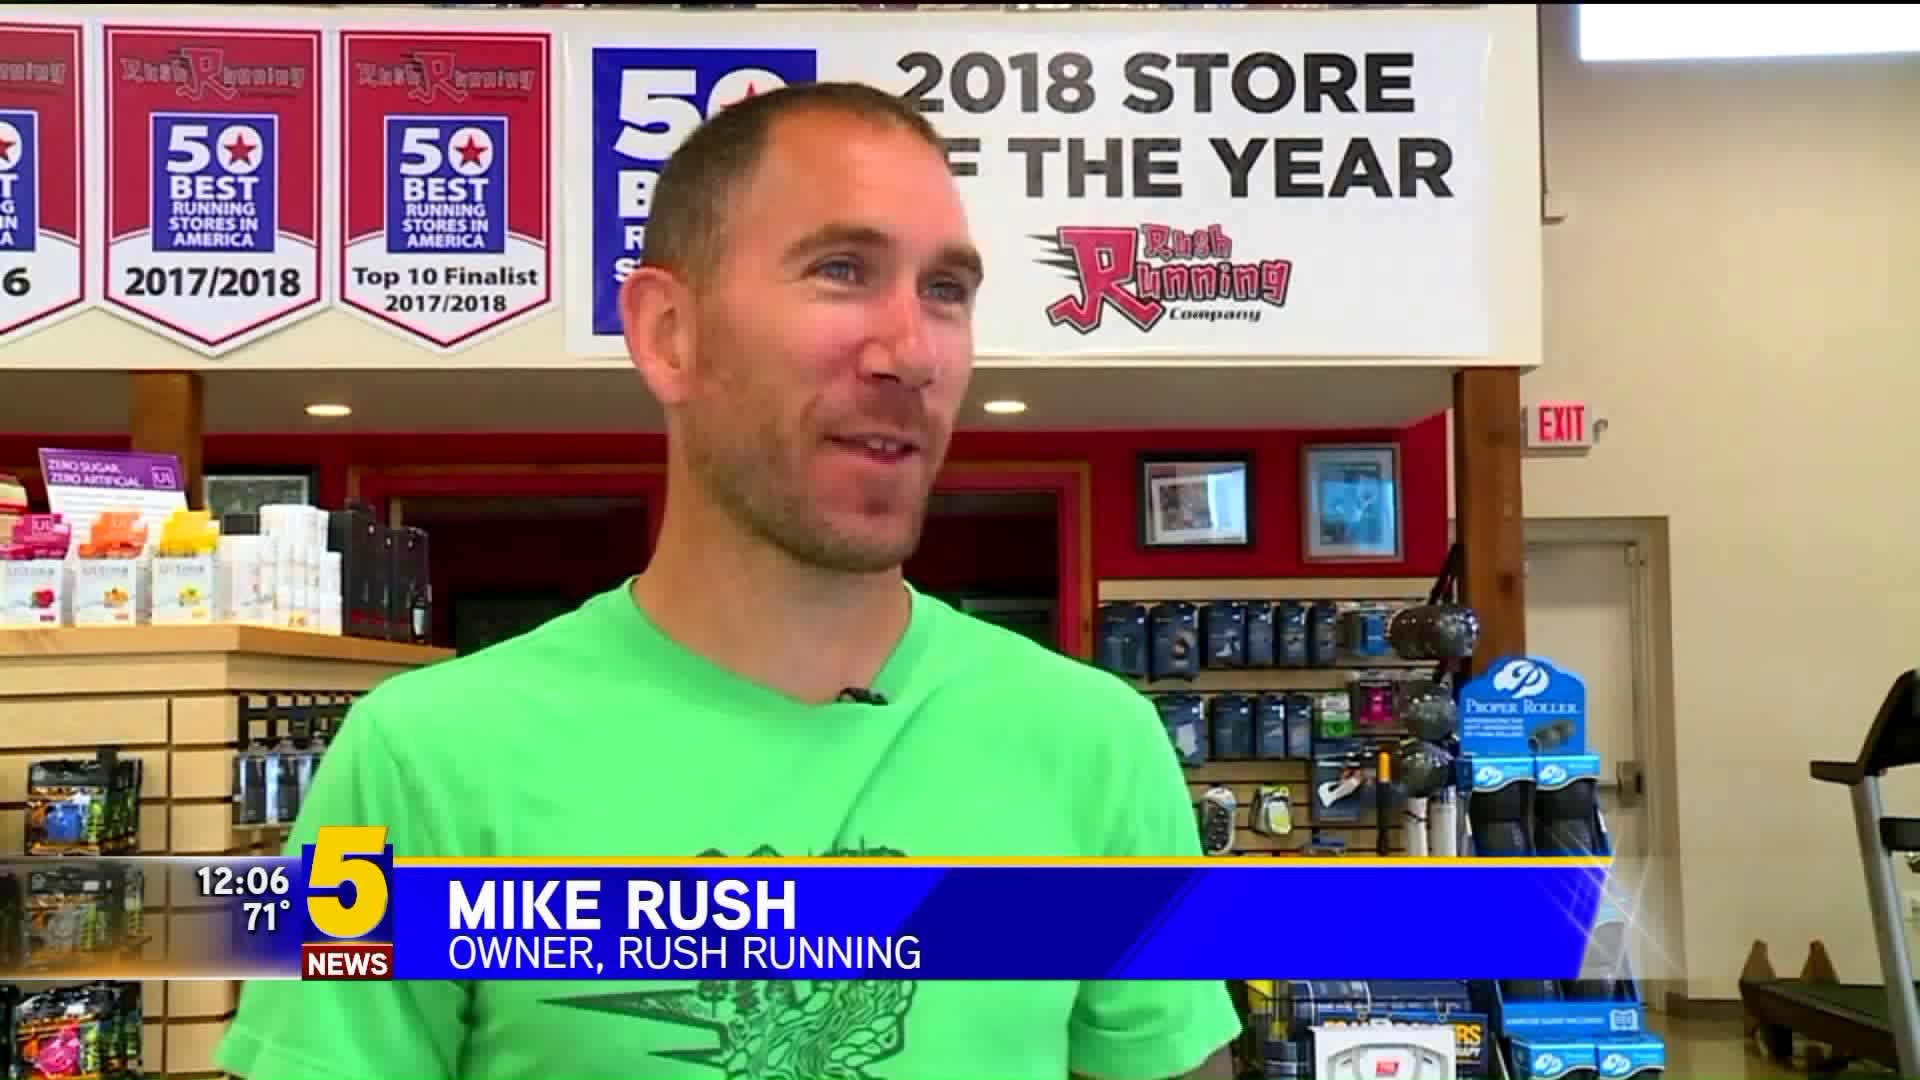 2018 Store of the Year